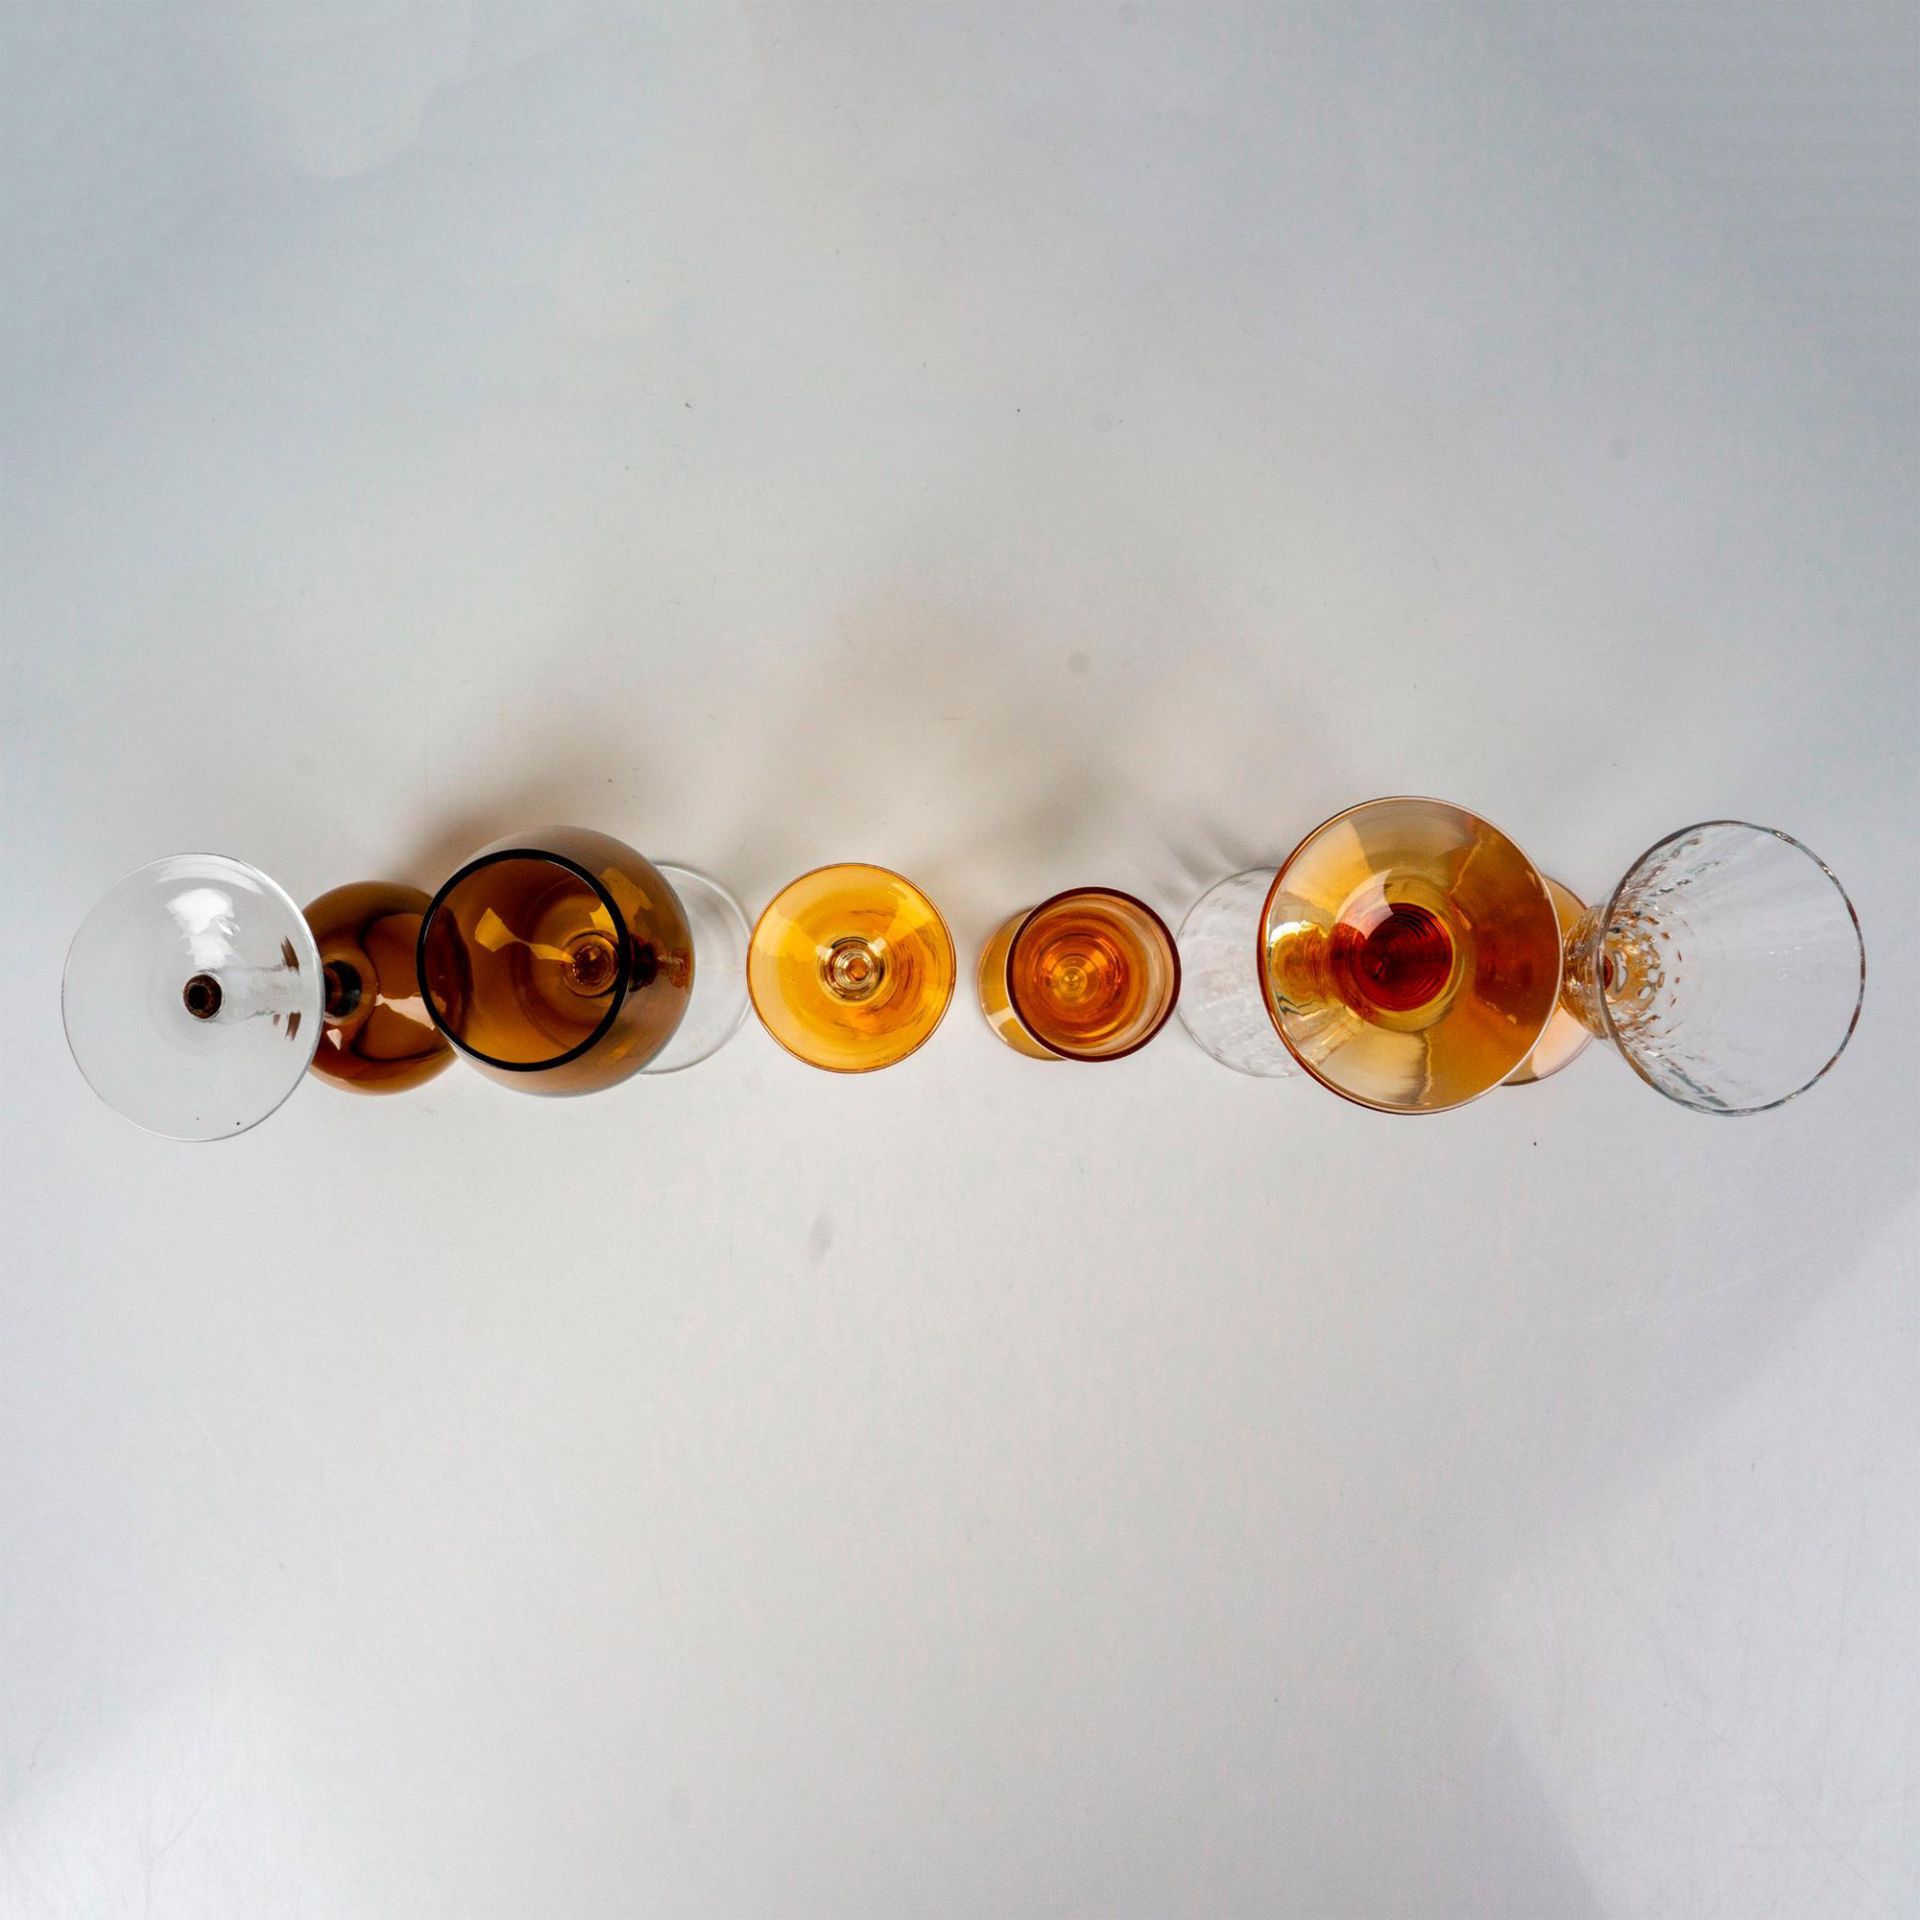 6pc Cordial Glasses, Shades of Amber - Image 2 of 2